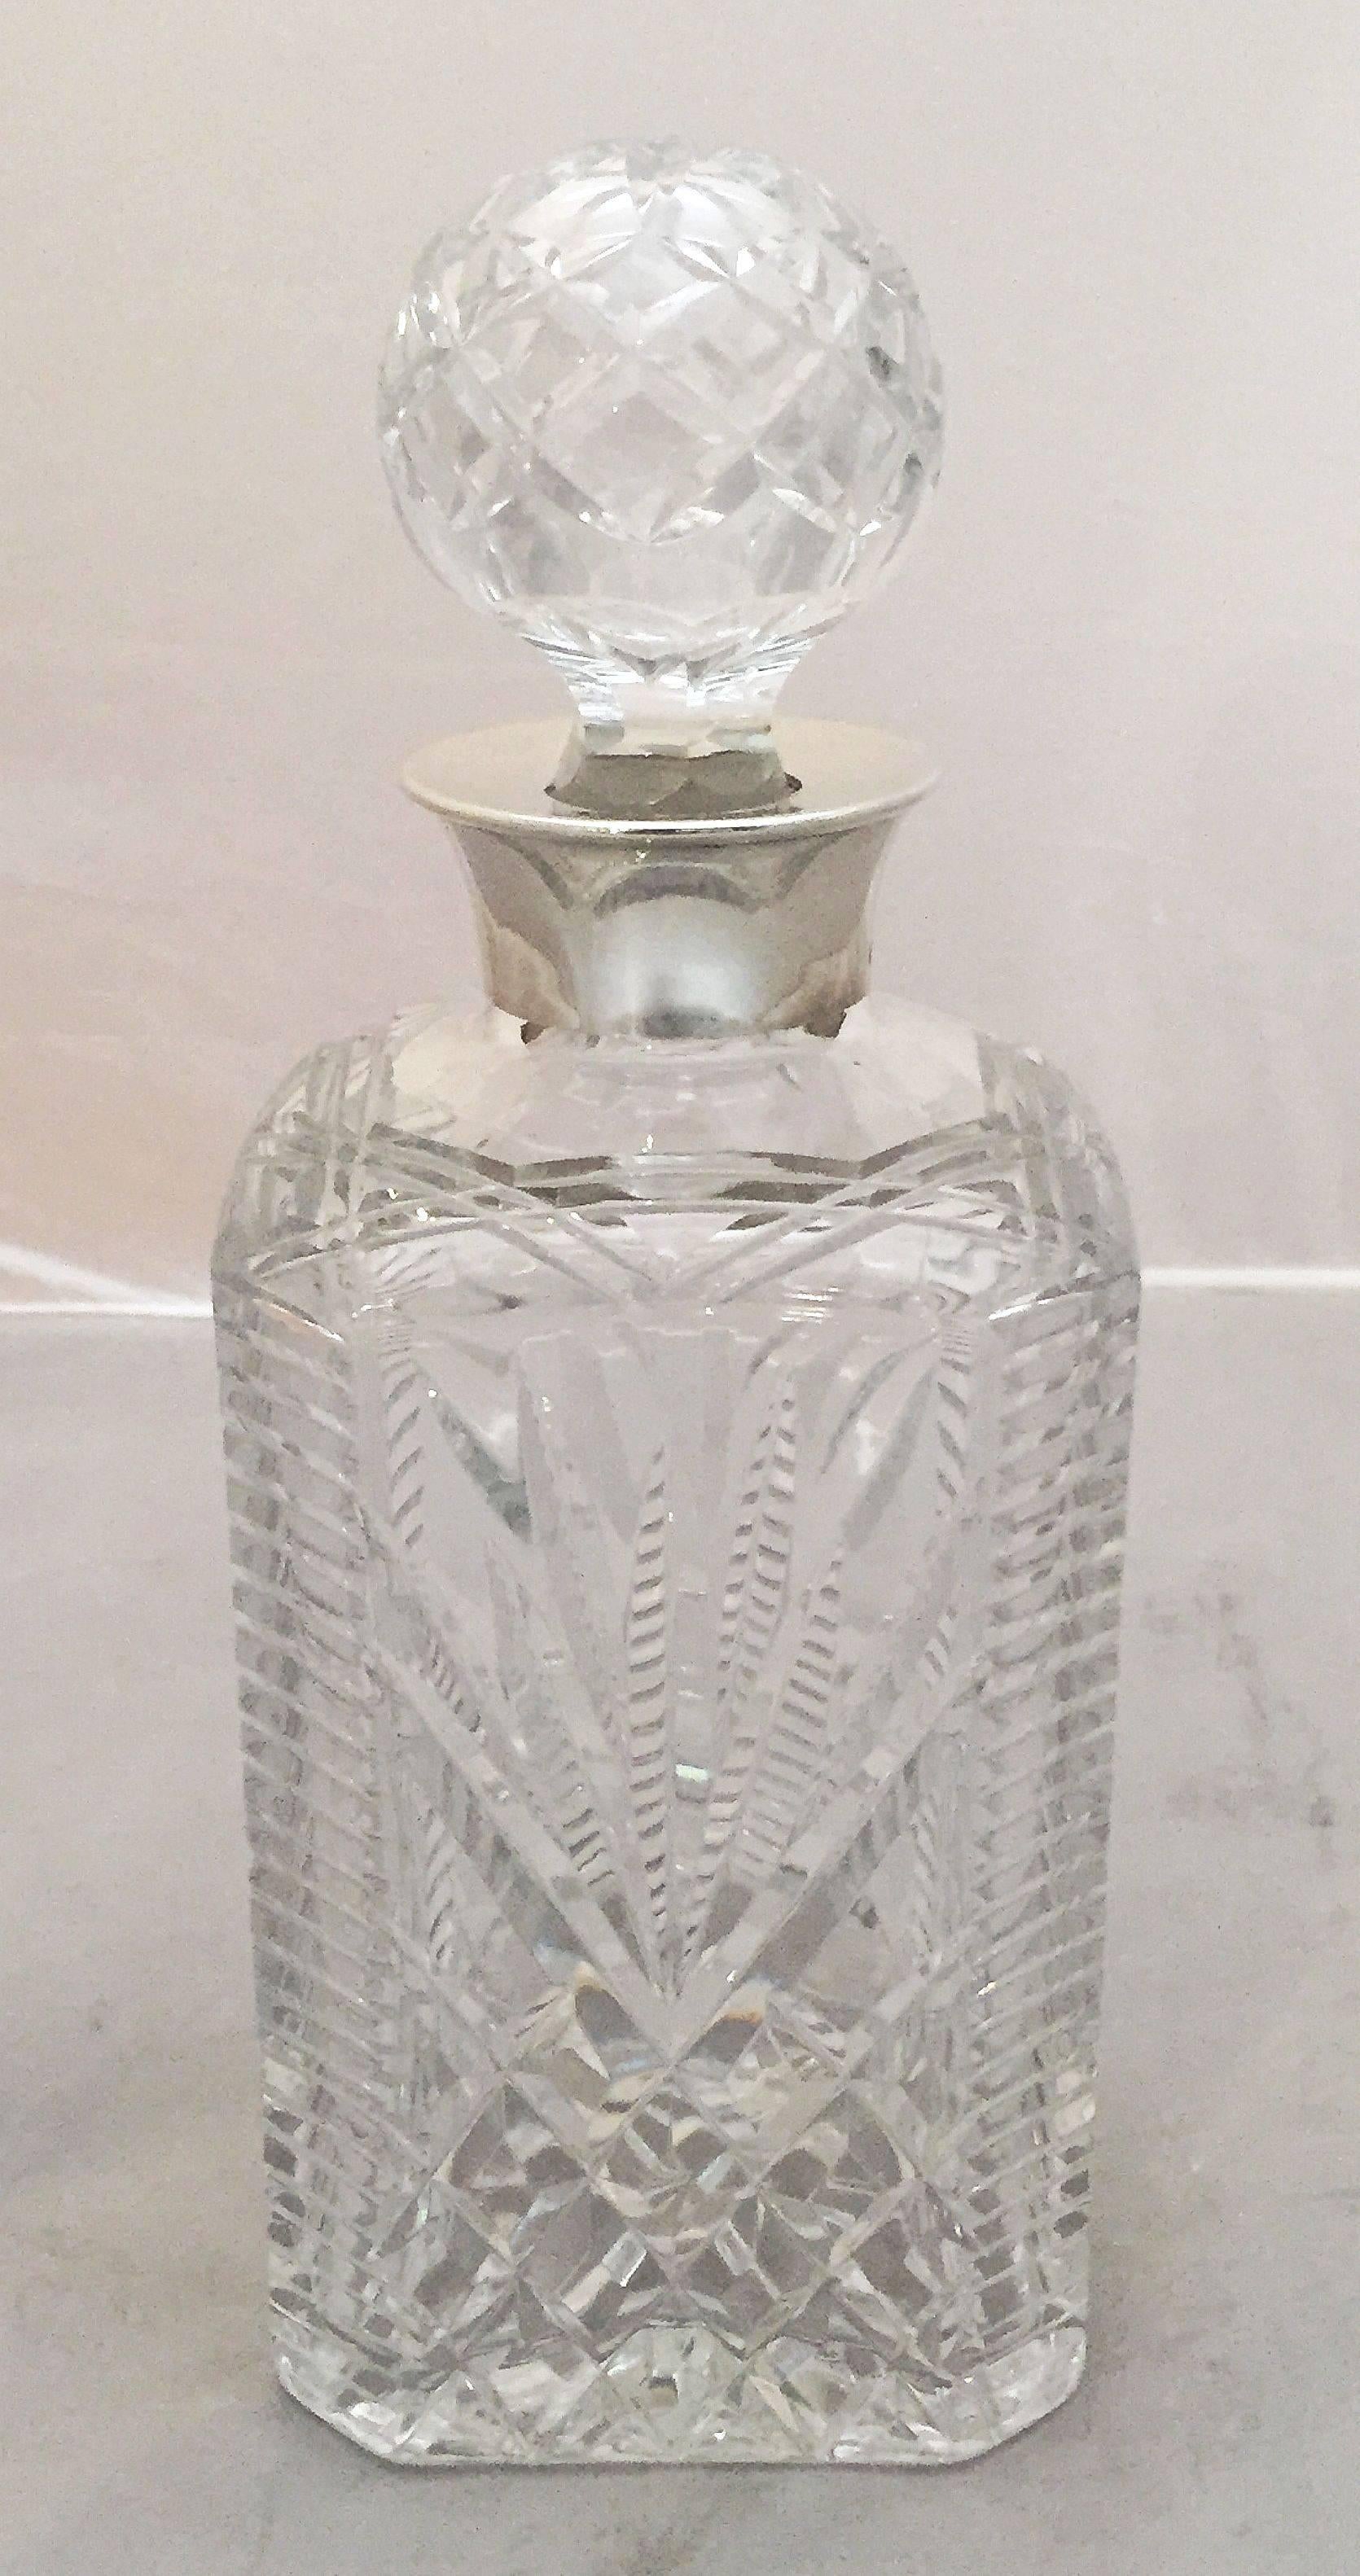 English Cut Crystal Spirits or Whiskey Decanter with Sterling Silver Collar 3